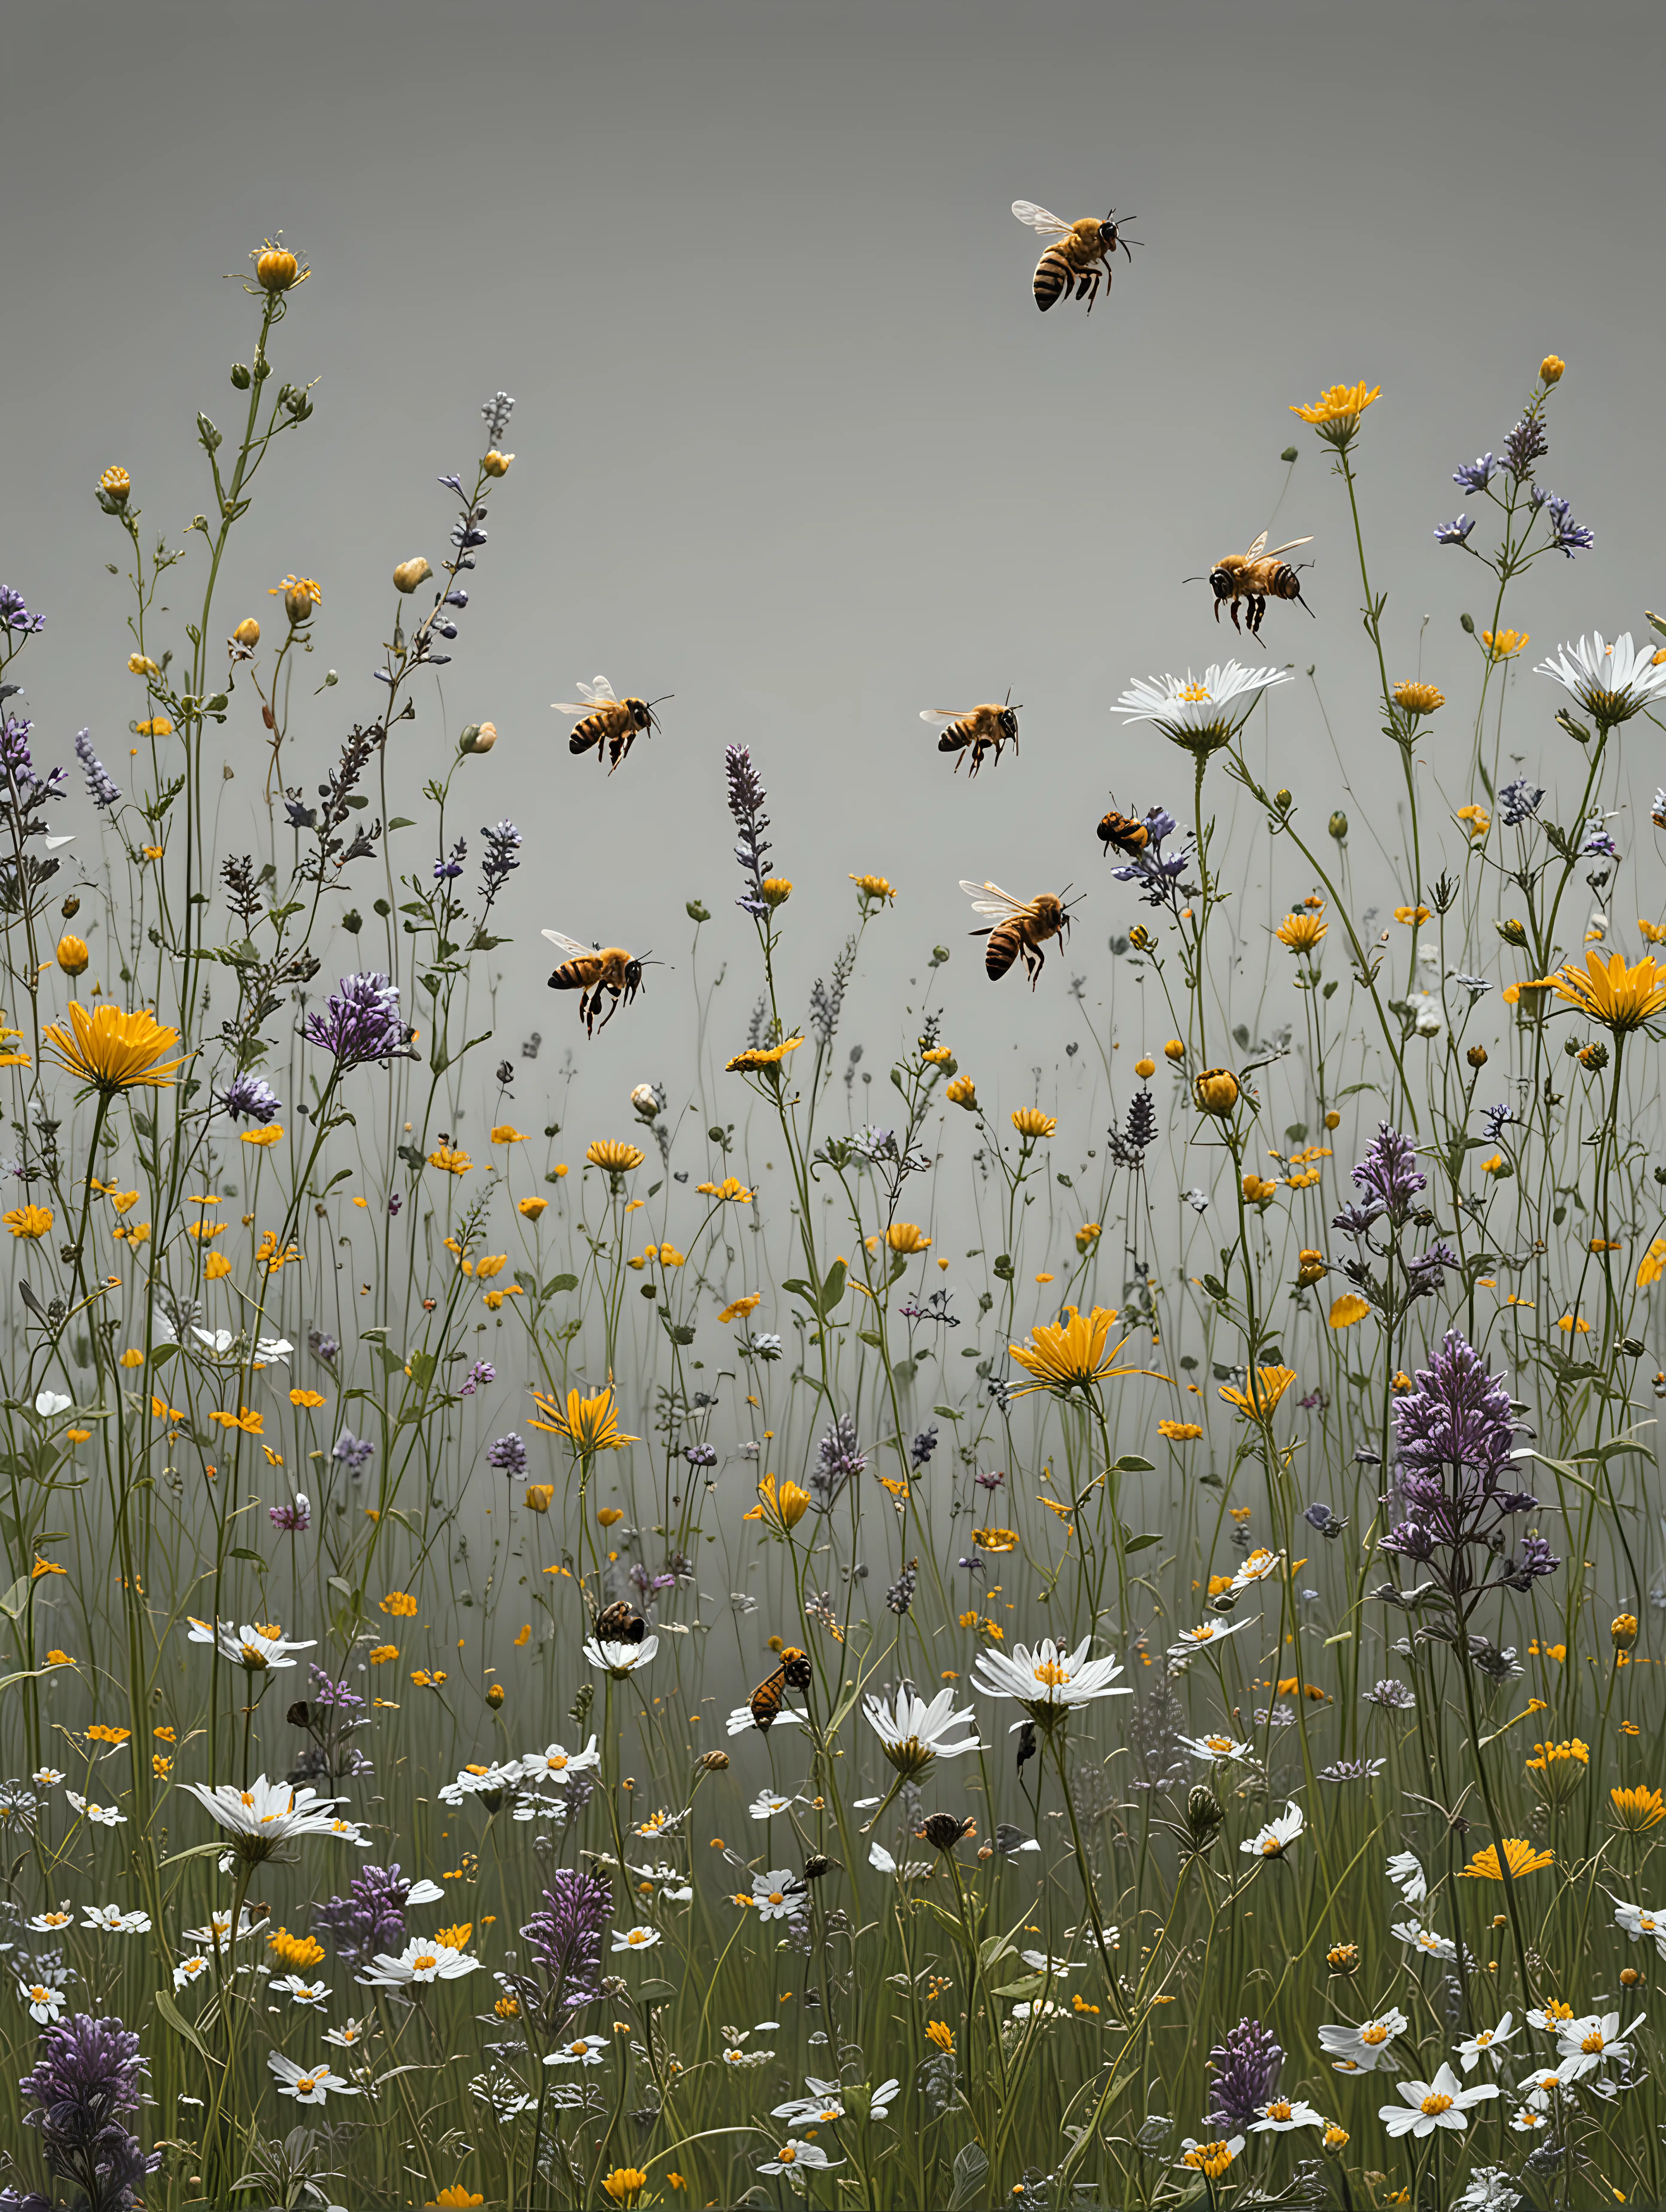 Bees Gathering Nectar from Wildflowers in Meadow